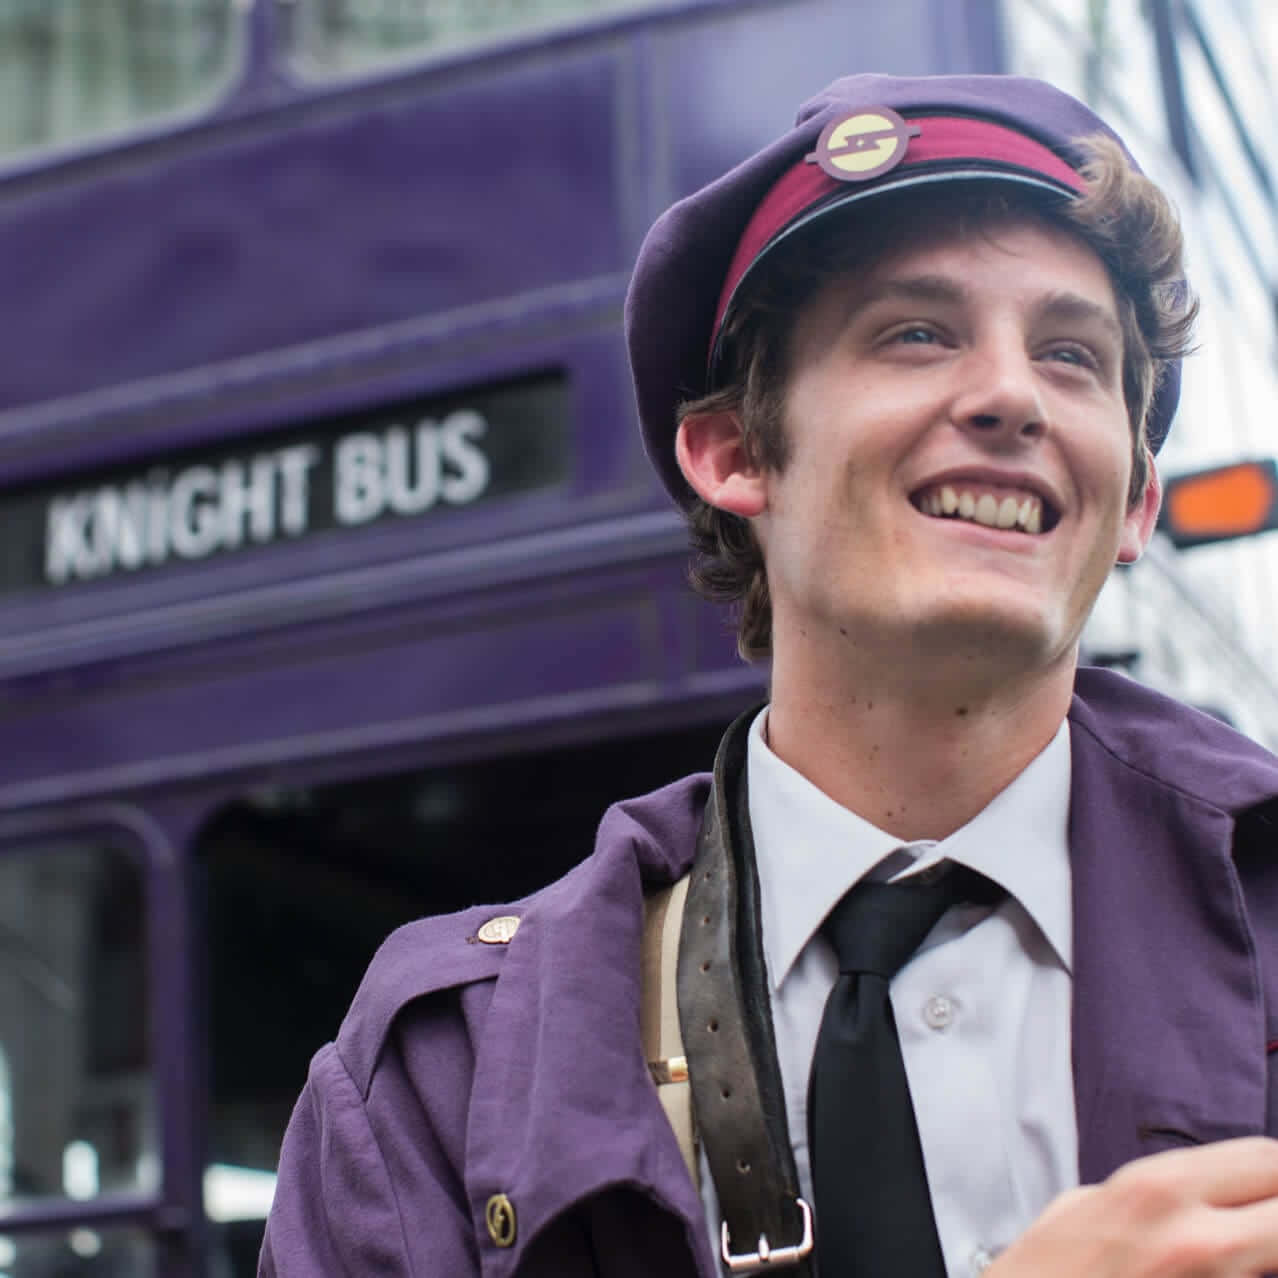 Step aboard the Knight Bus to magical adventure Wallpaper